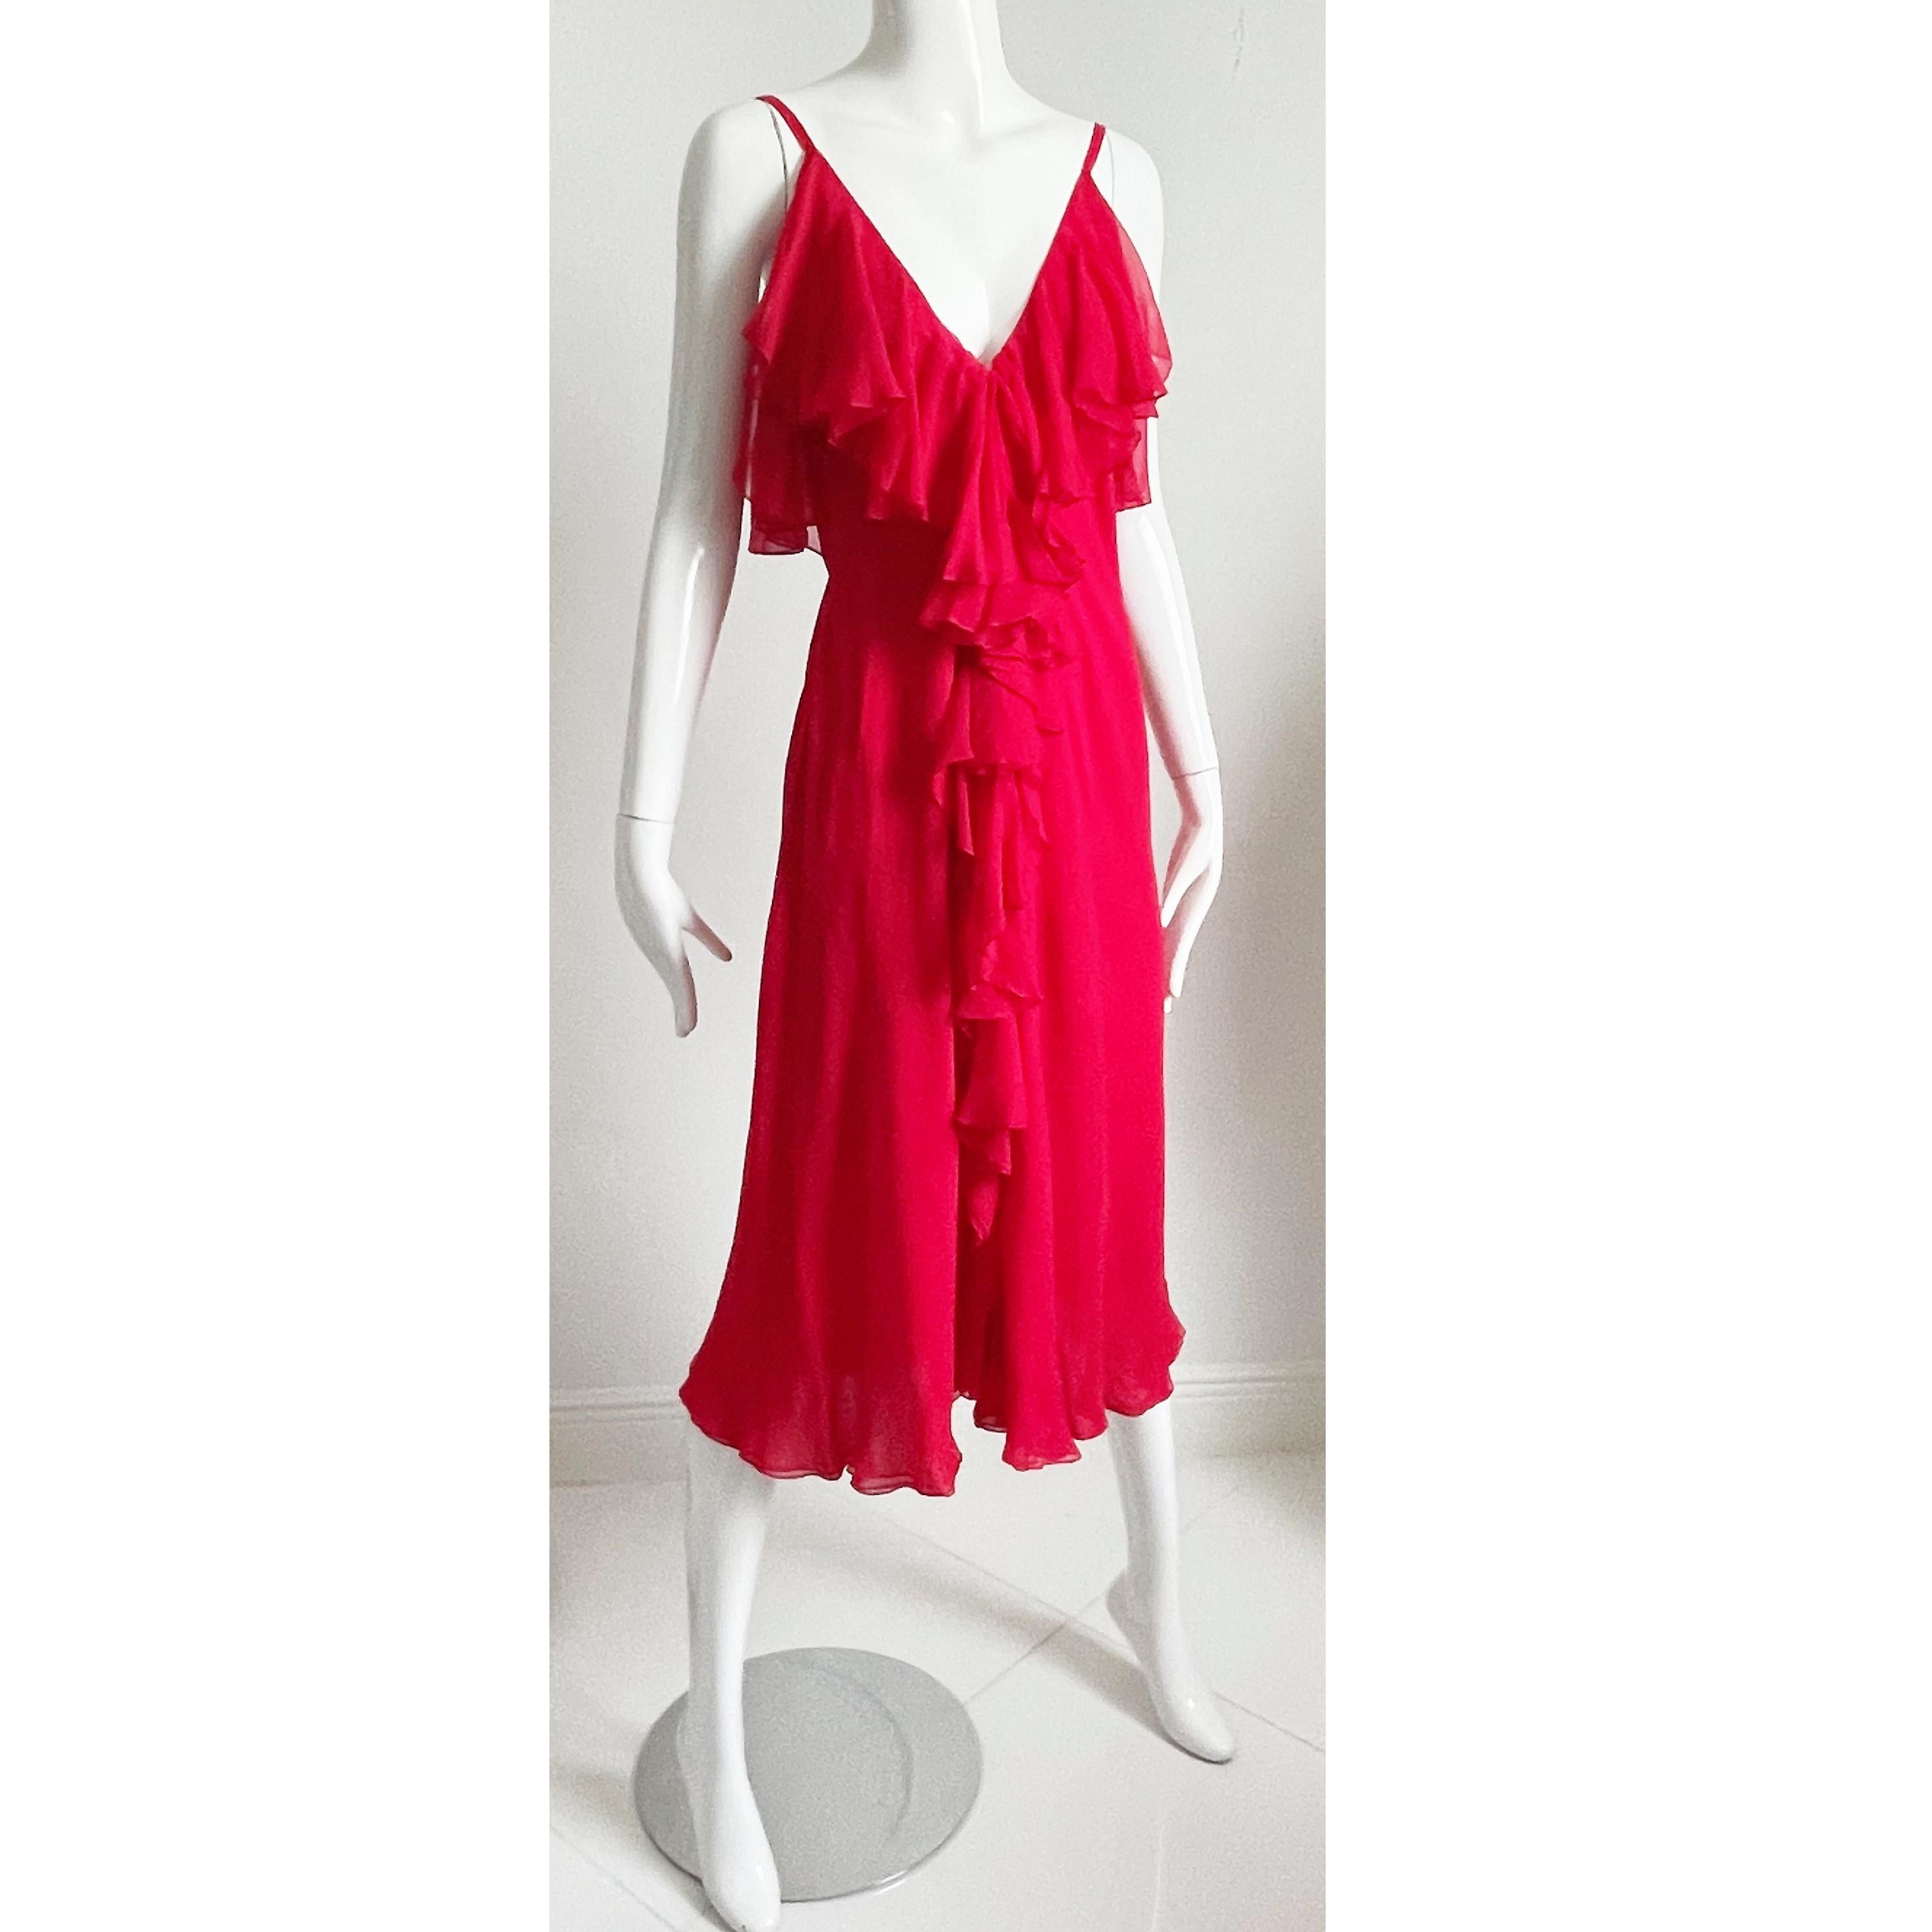 Pauline Trigere Dress and Shawl 2pc Set Red Silk Chiffon Loose Ruffles Vintage For Sale 2